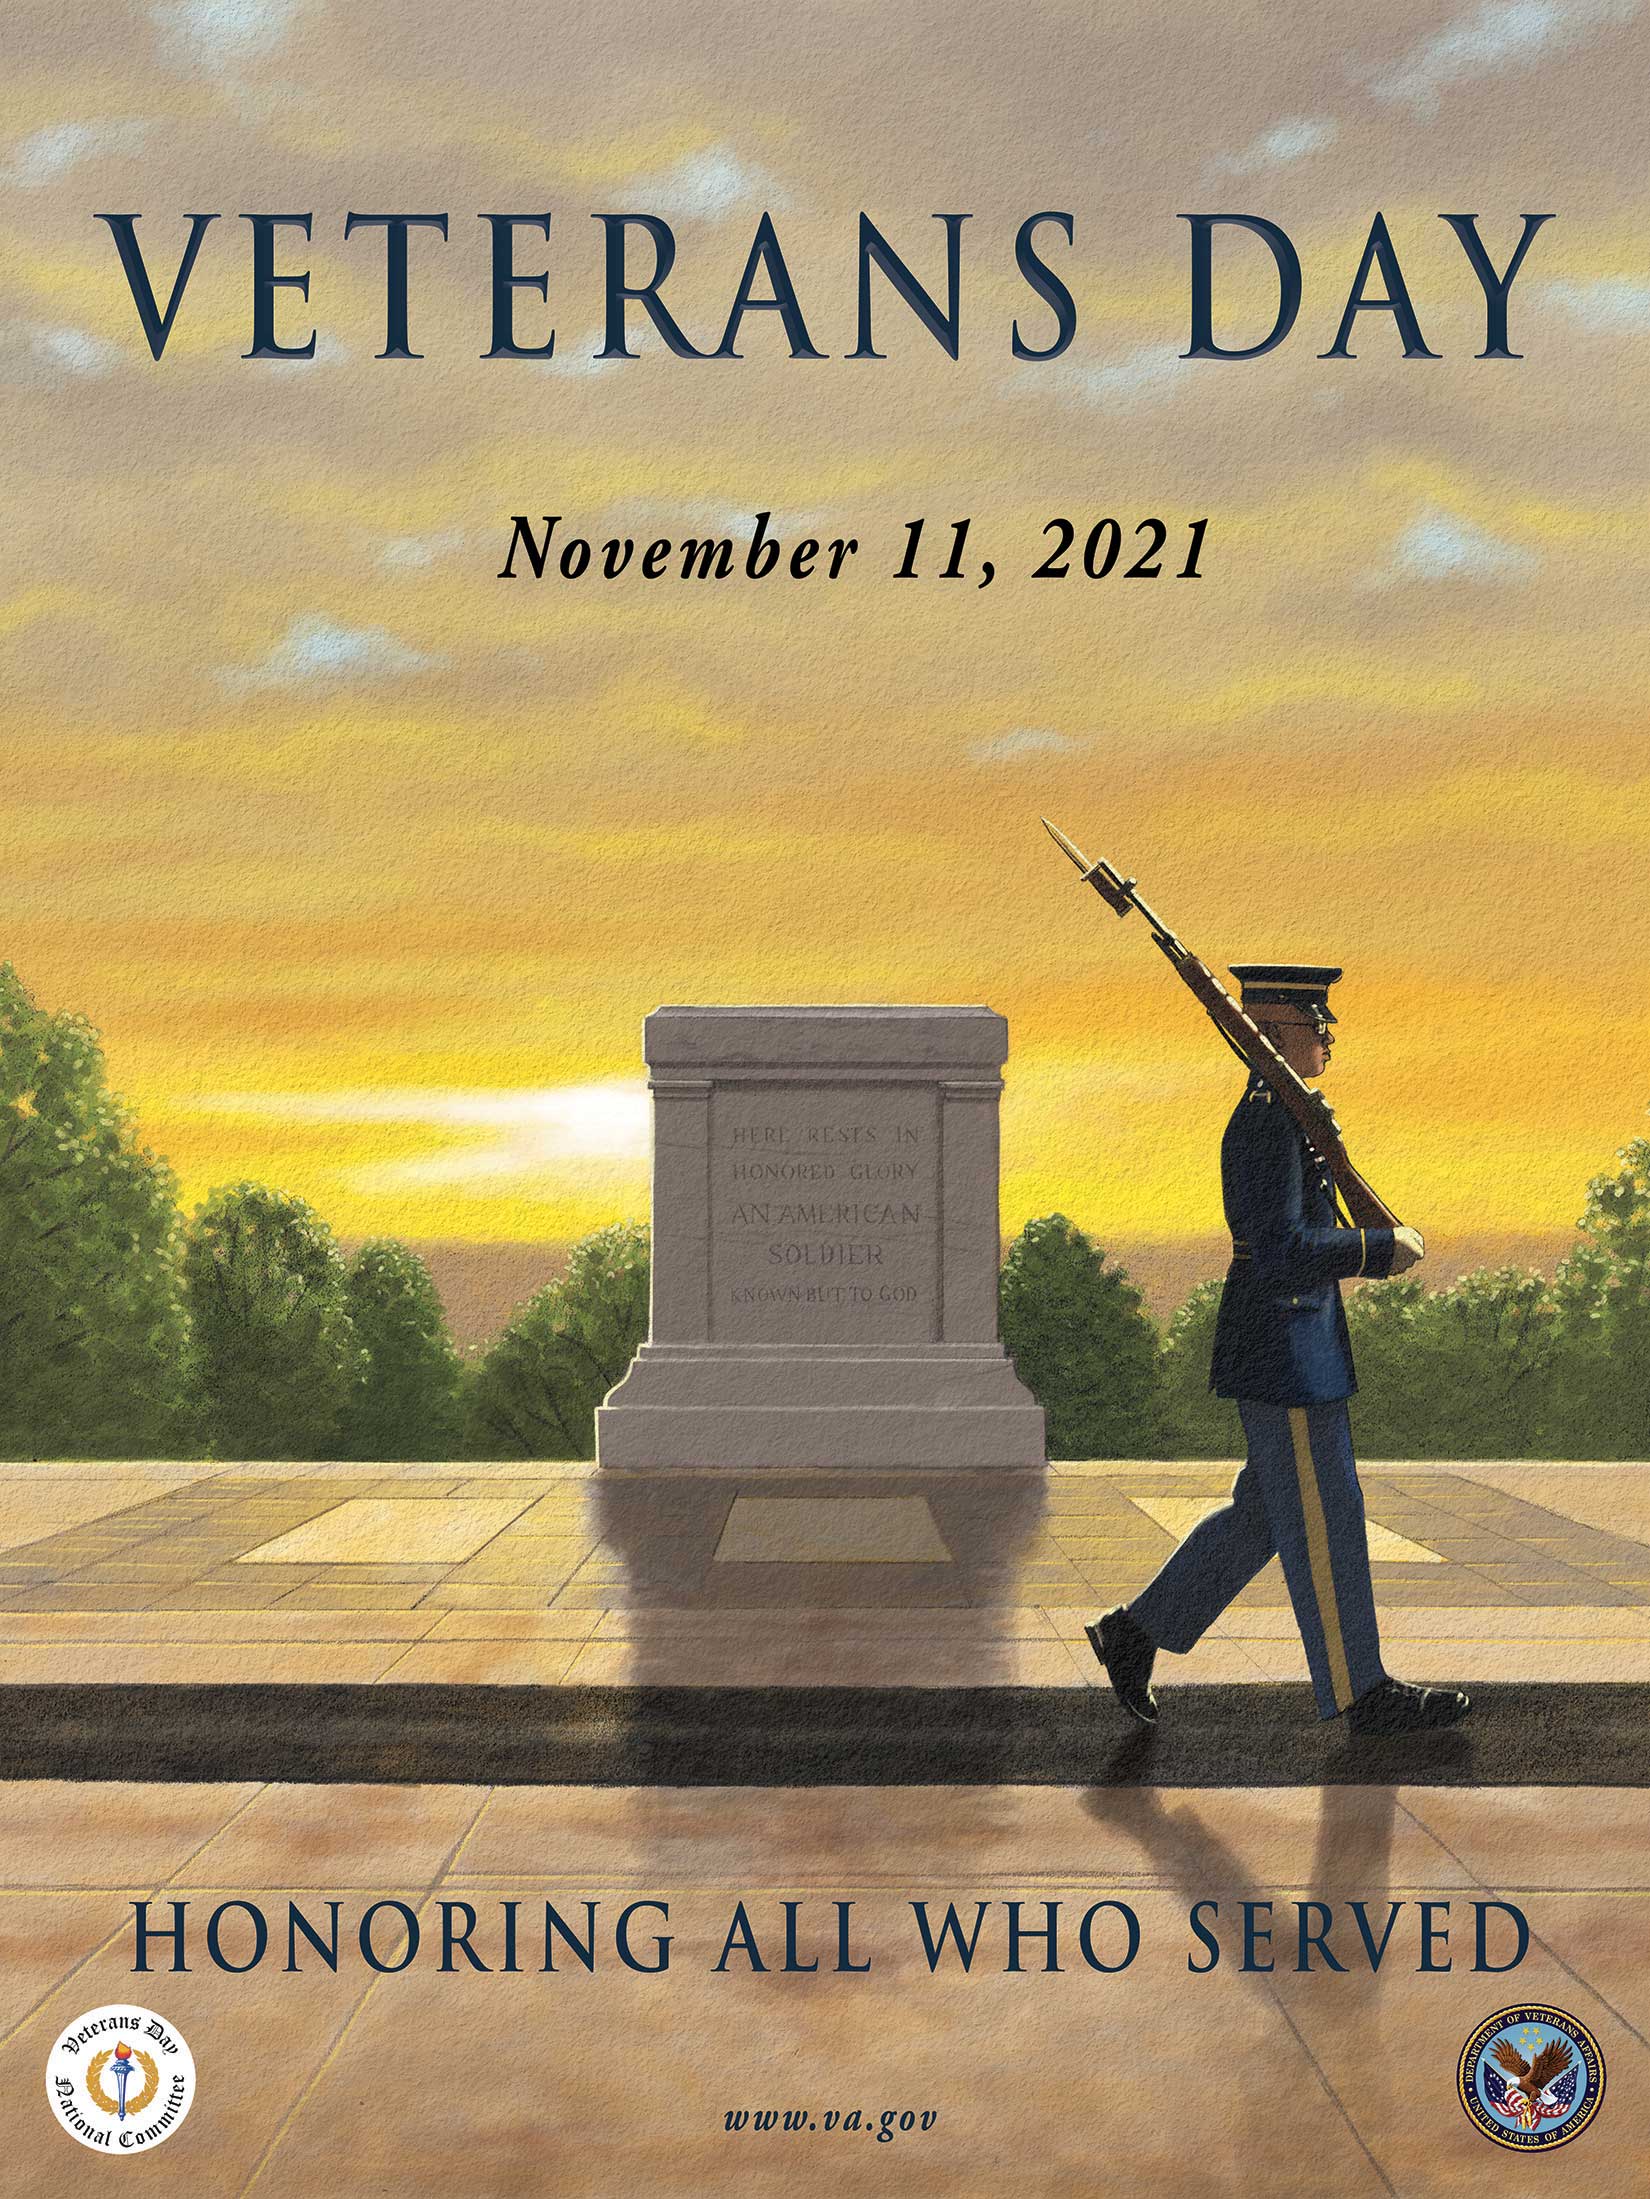 Veterans Day Poster Gallery of Public and Intergovernmental Affairs